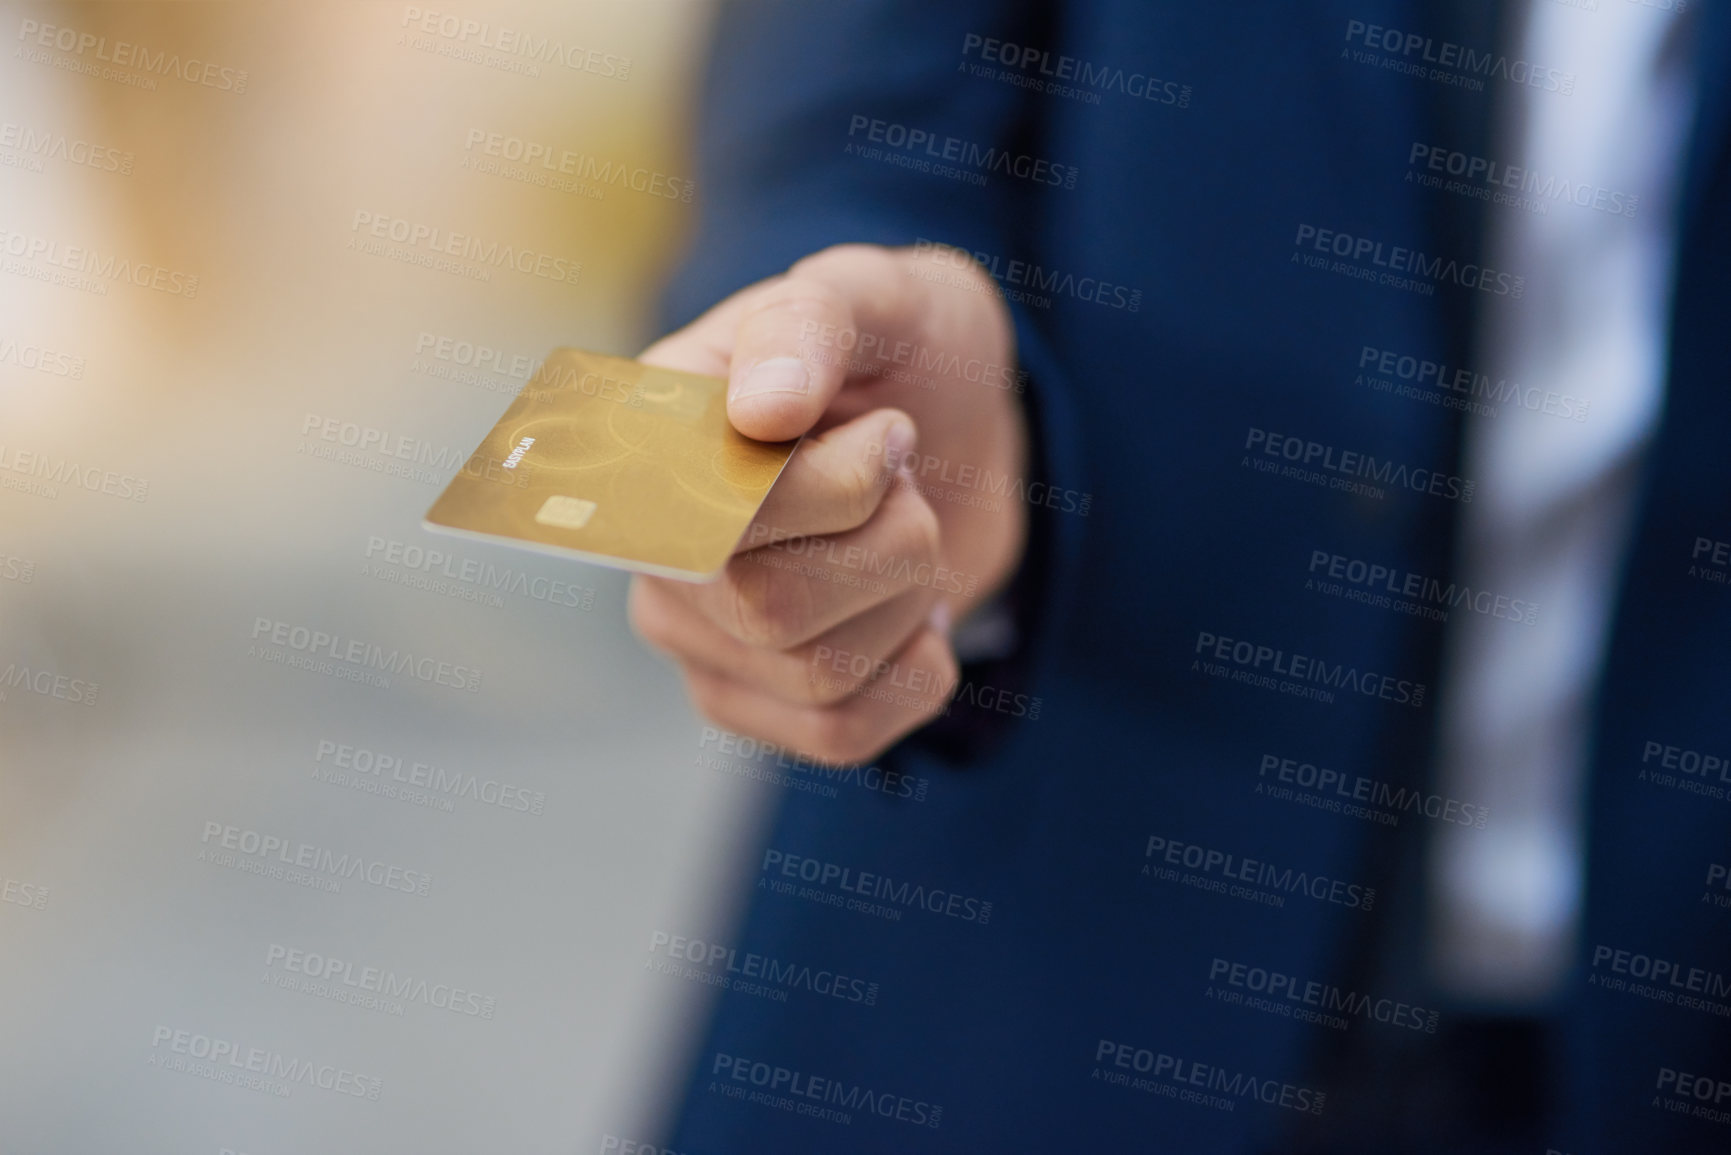 Buy stock photo Cropped shot of an unrecognizable businessman holding out a credit card